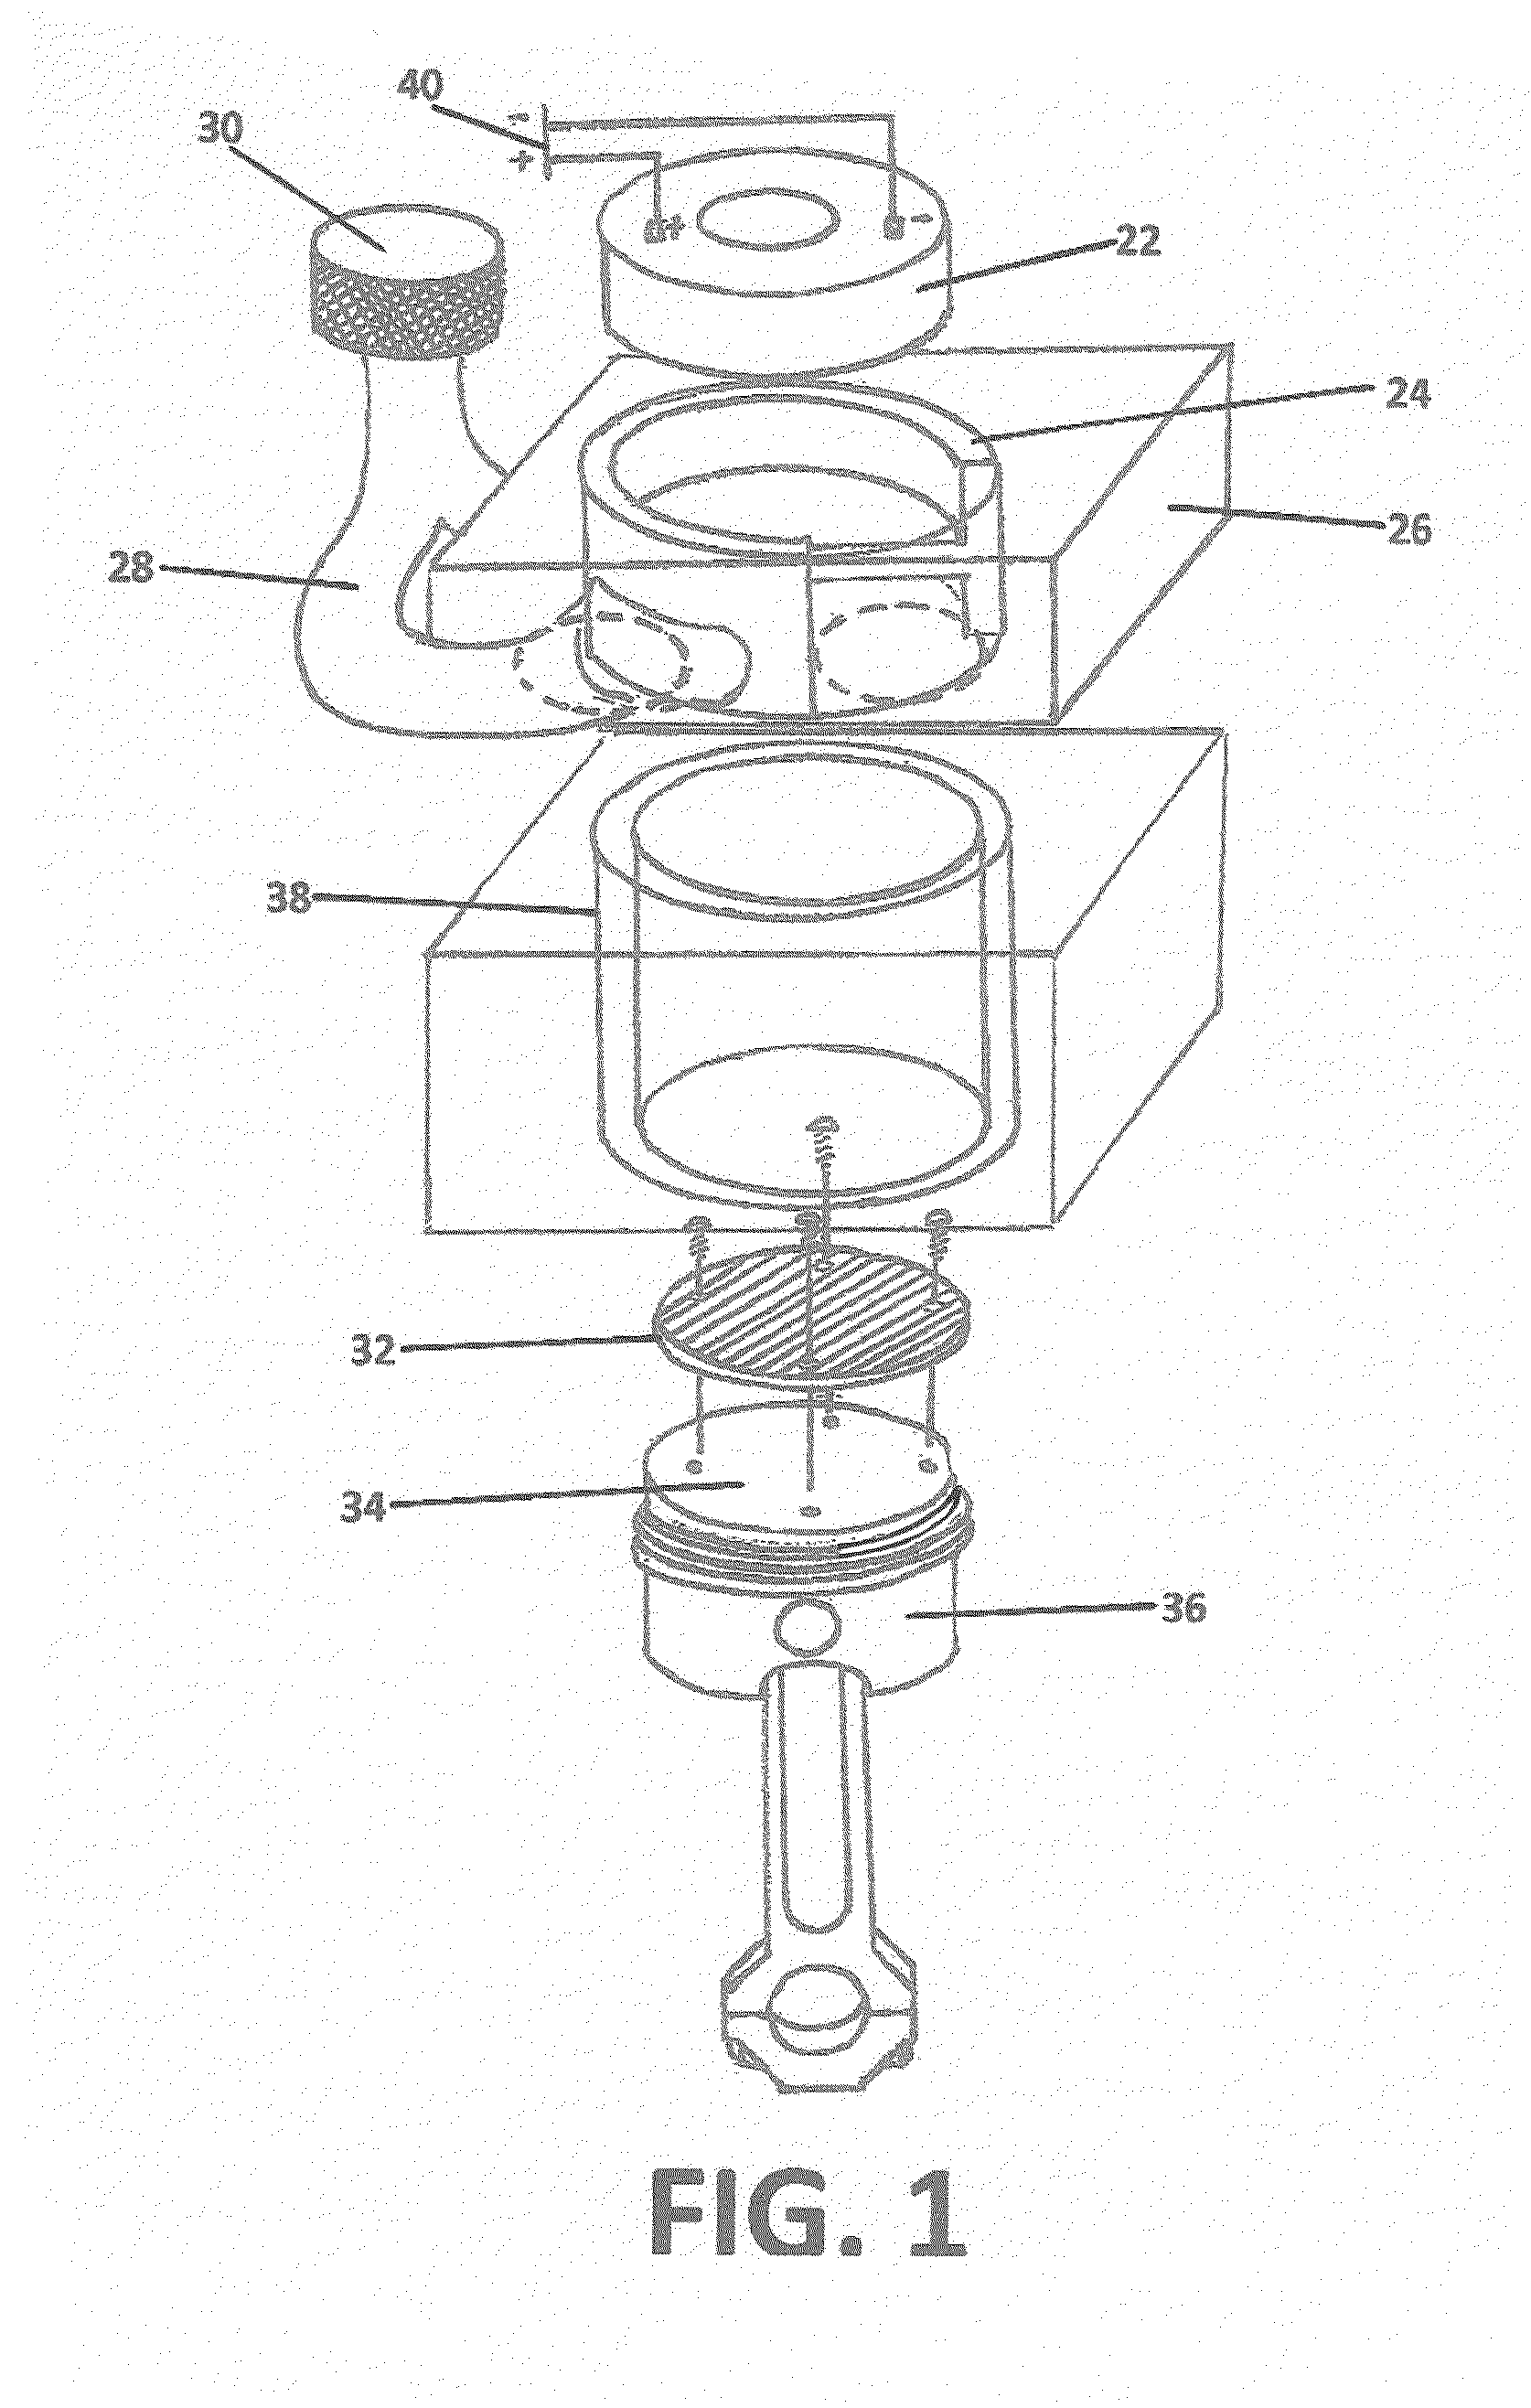 Magnetically propelled engine with magnetic field reduction